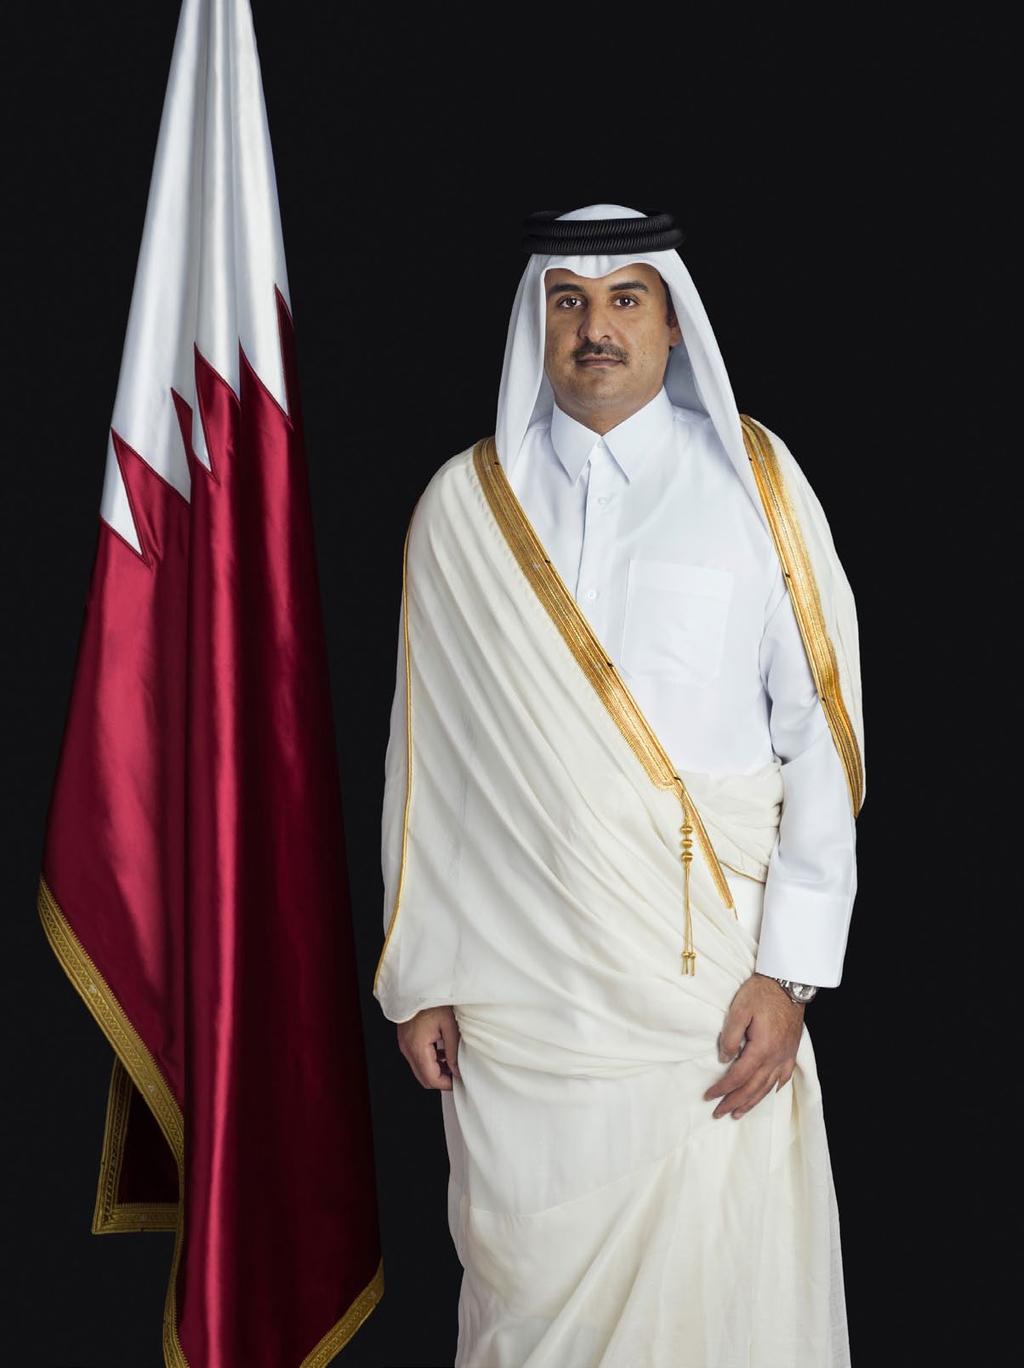 Qatar National Vision 2030 aims at transforming Qatar into an advanced country, capable of sustaining its own development and providing a high standard of living for all of its people for generations